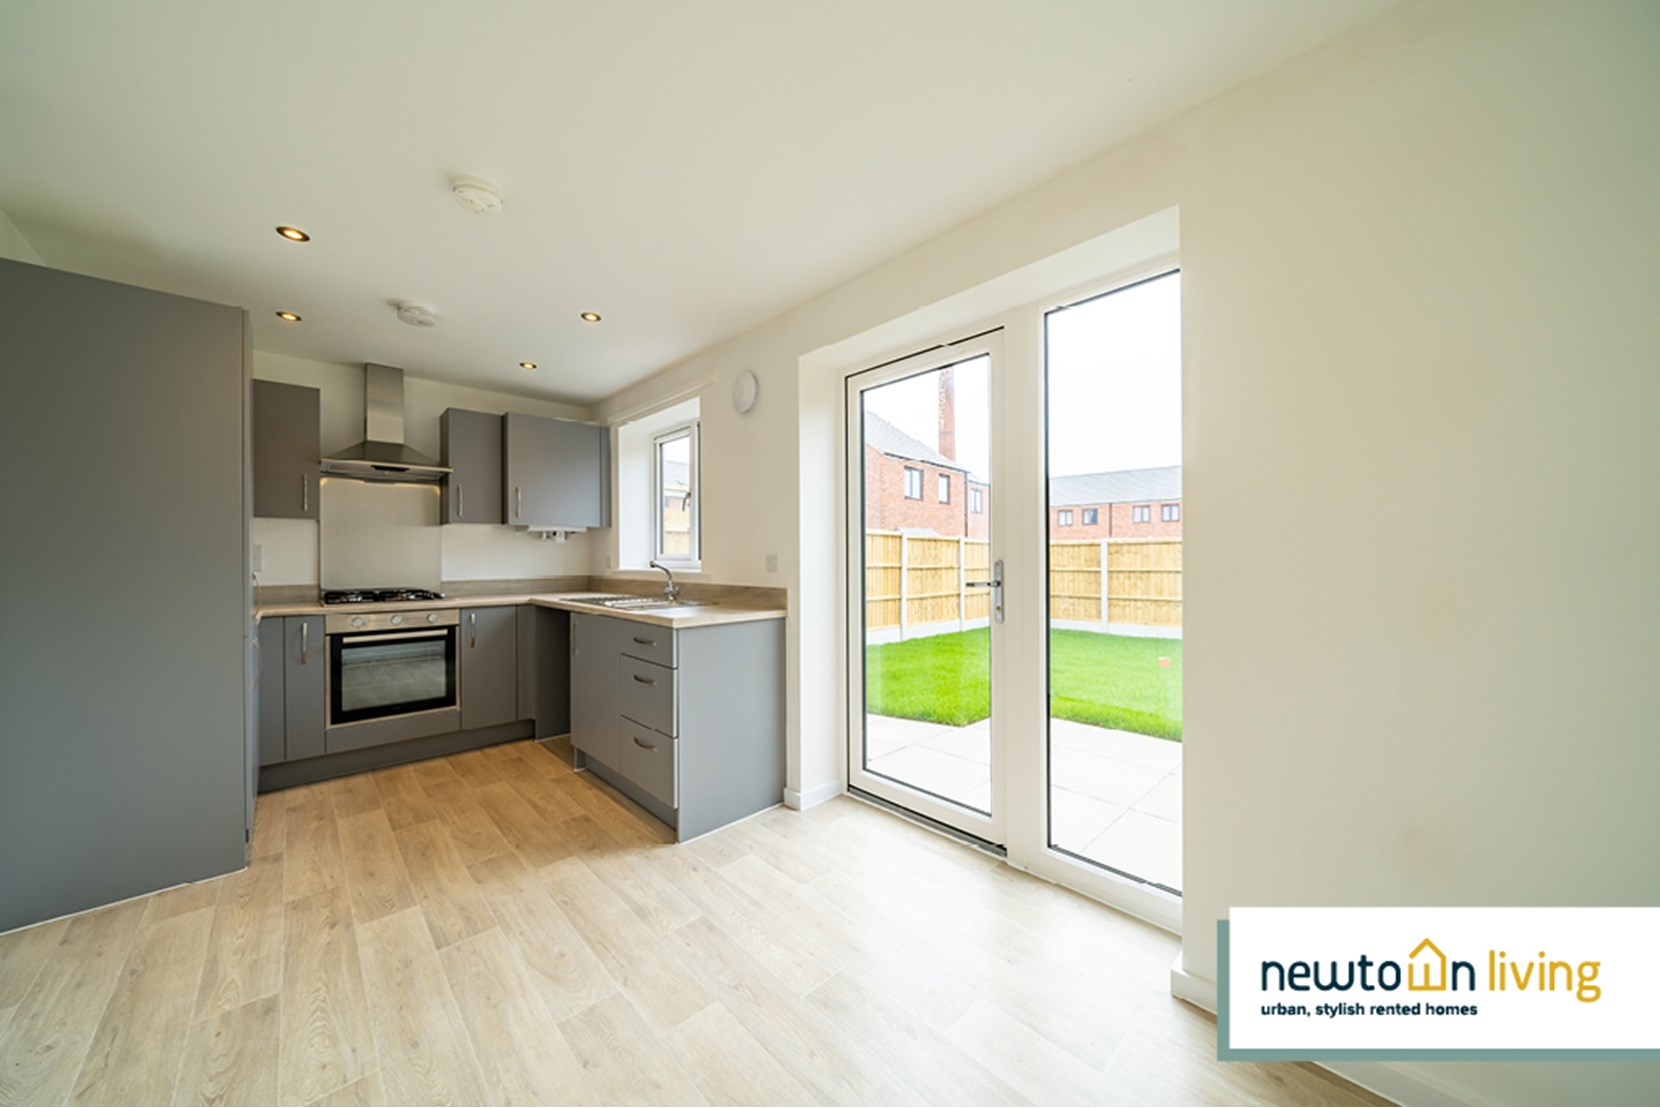 Houses to Rent by Newton Living at Lock 44, Leicester, LE4, kitchen dining area